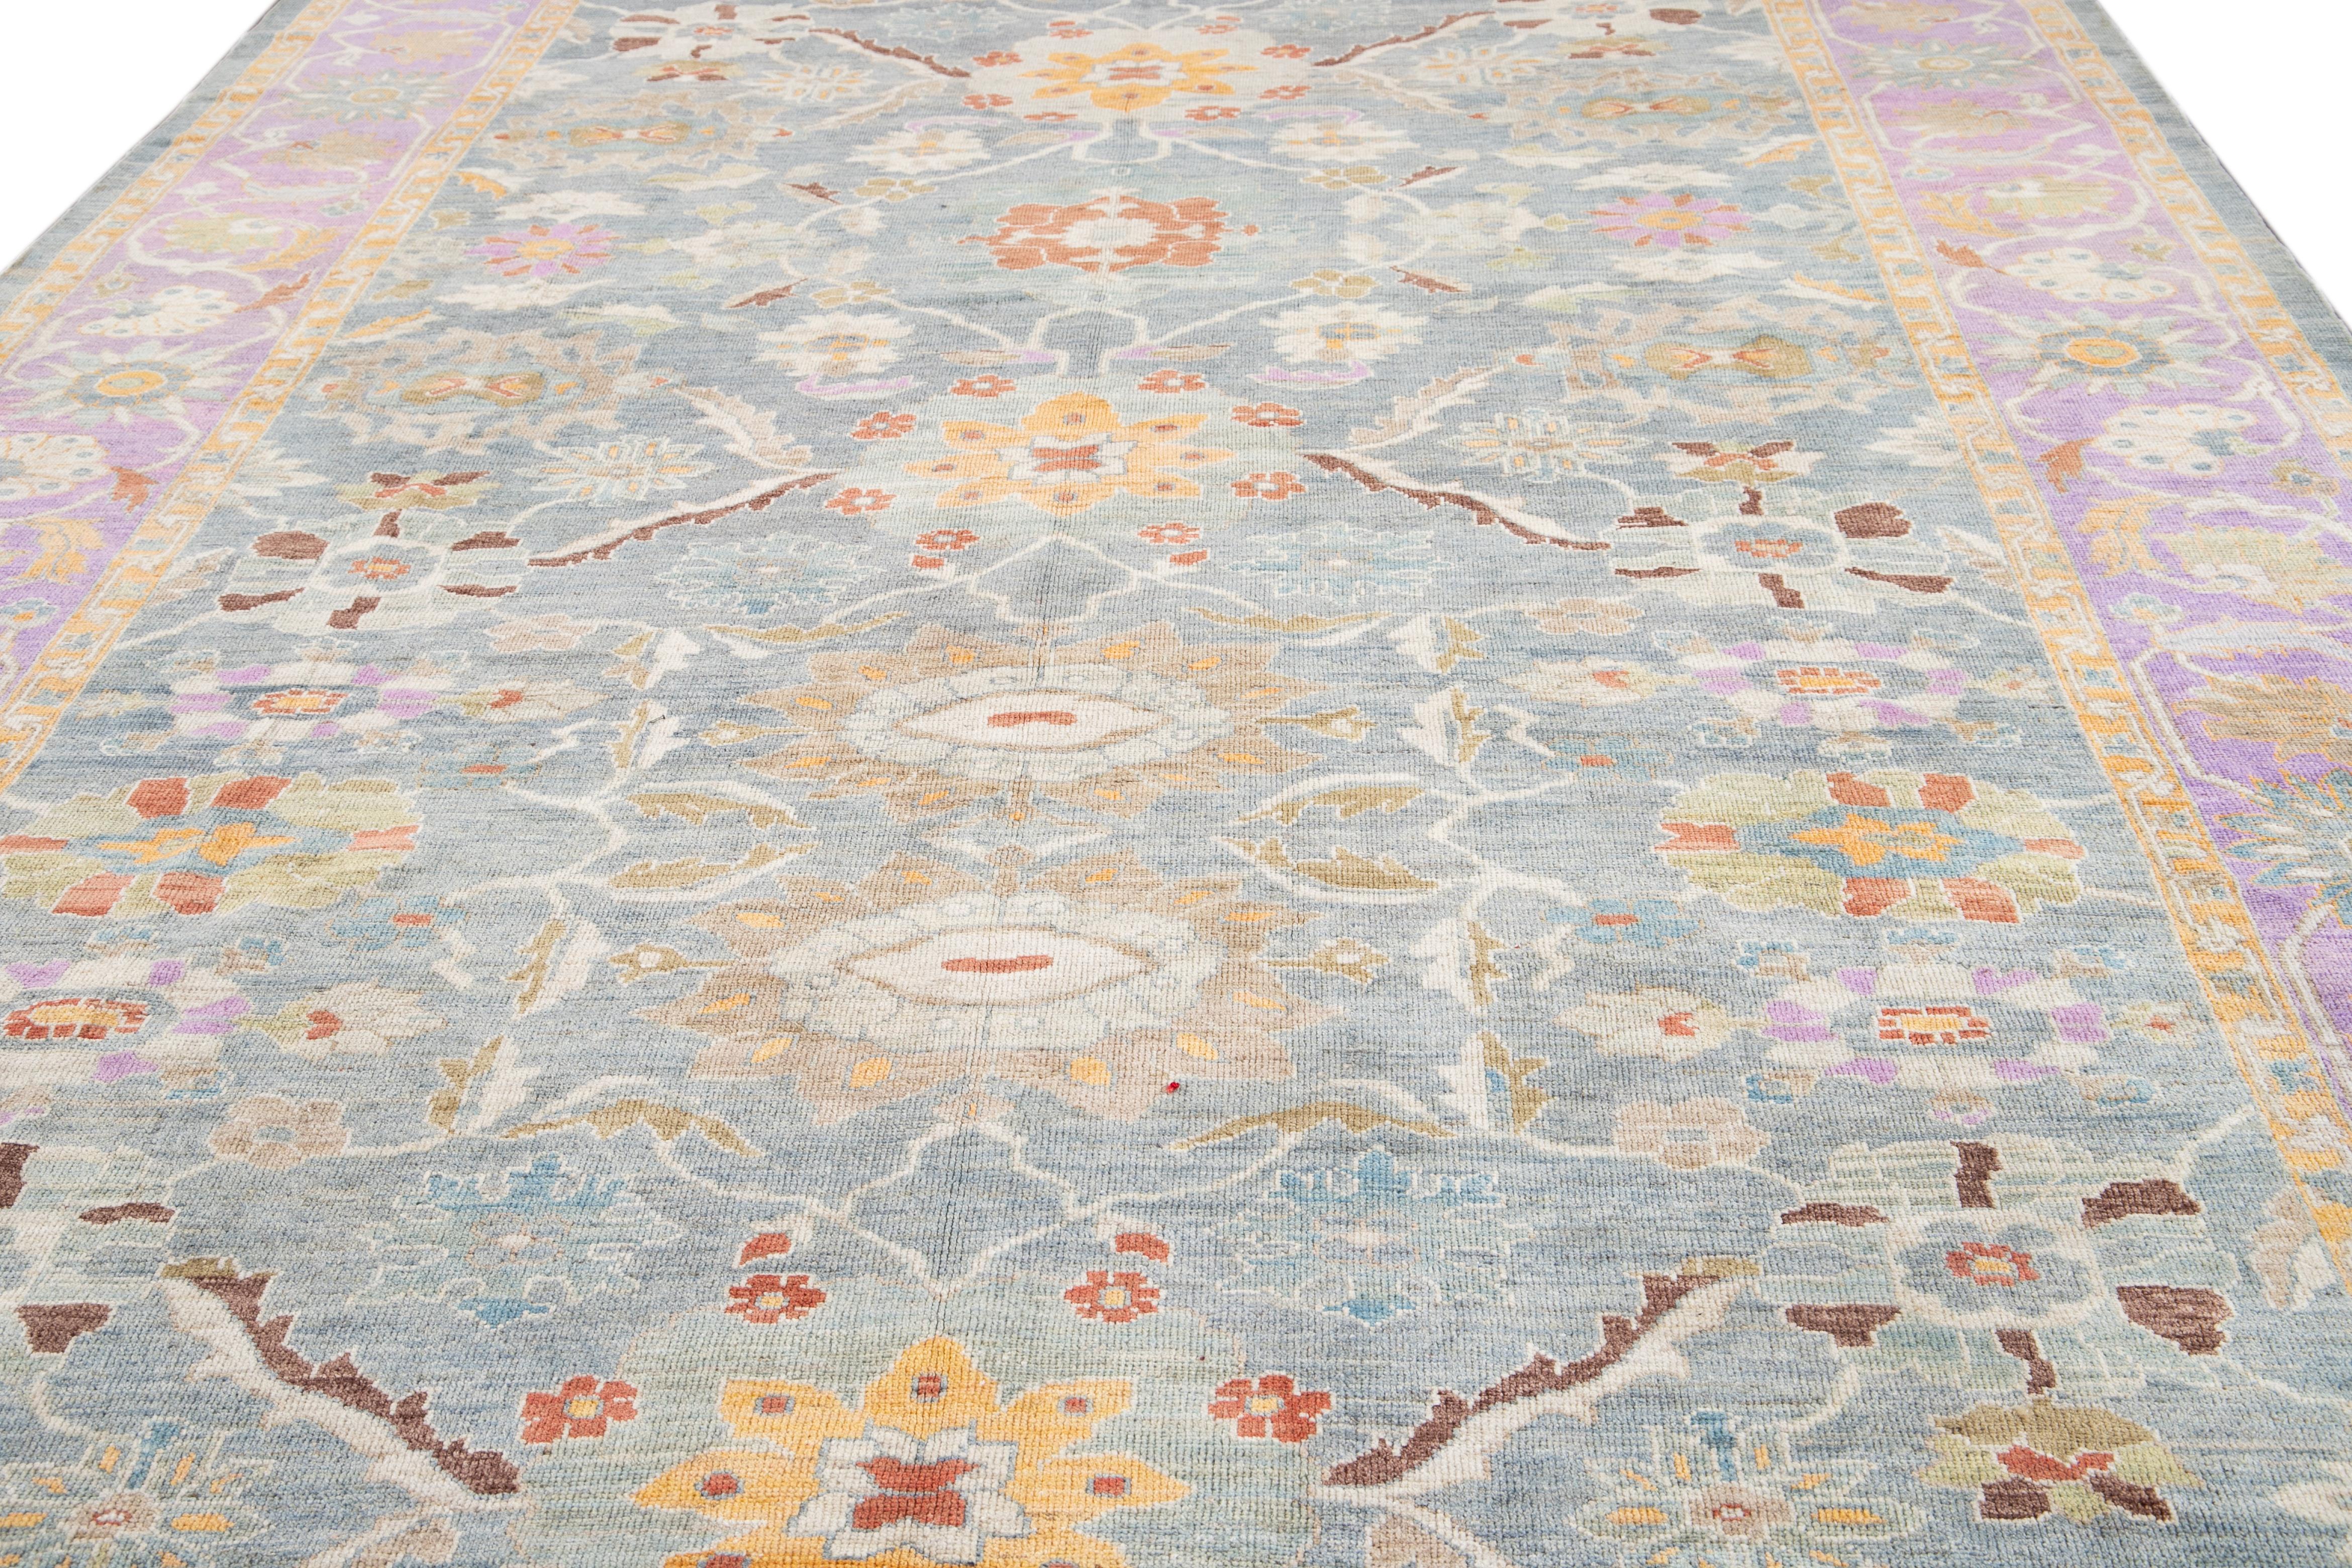 Beautiful contemporary Sultanabad rug hand-knotted wool rug with a blue field. This Persian rug has a purple frame and multi-color accents in a gorgeous floral pattern design.

This rug measures 10' x 16'.